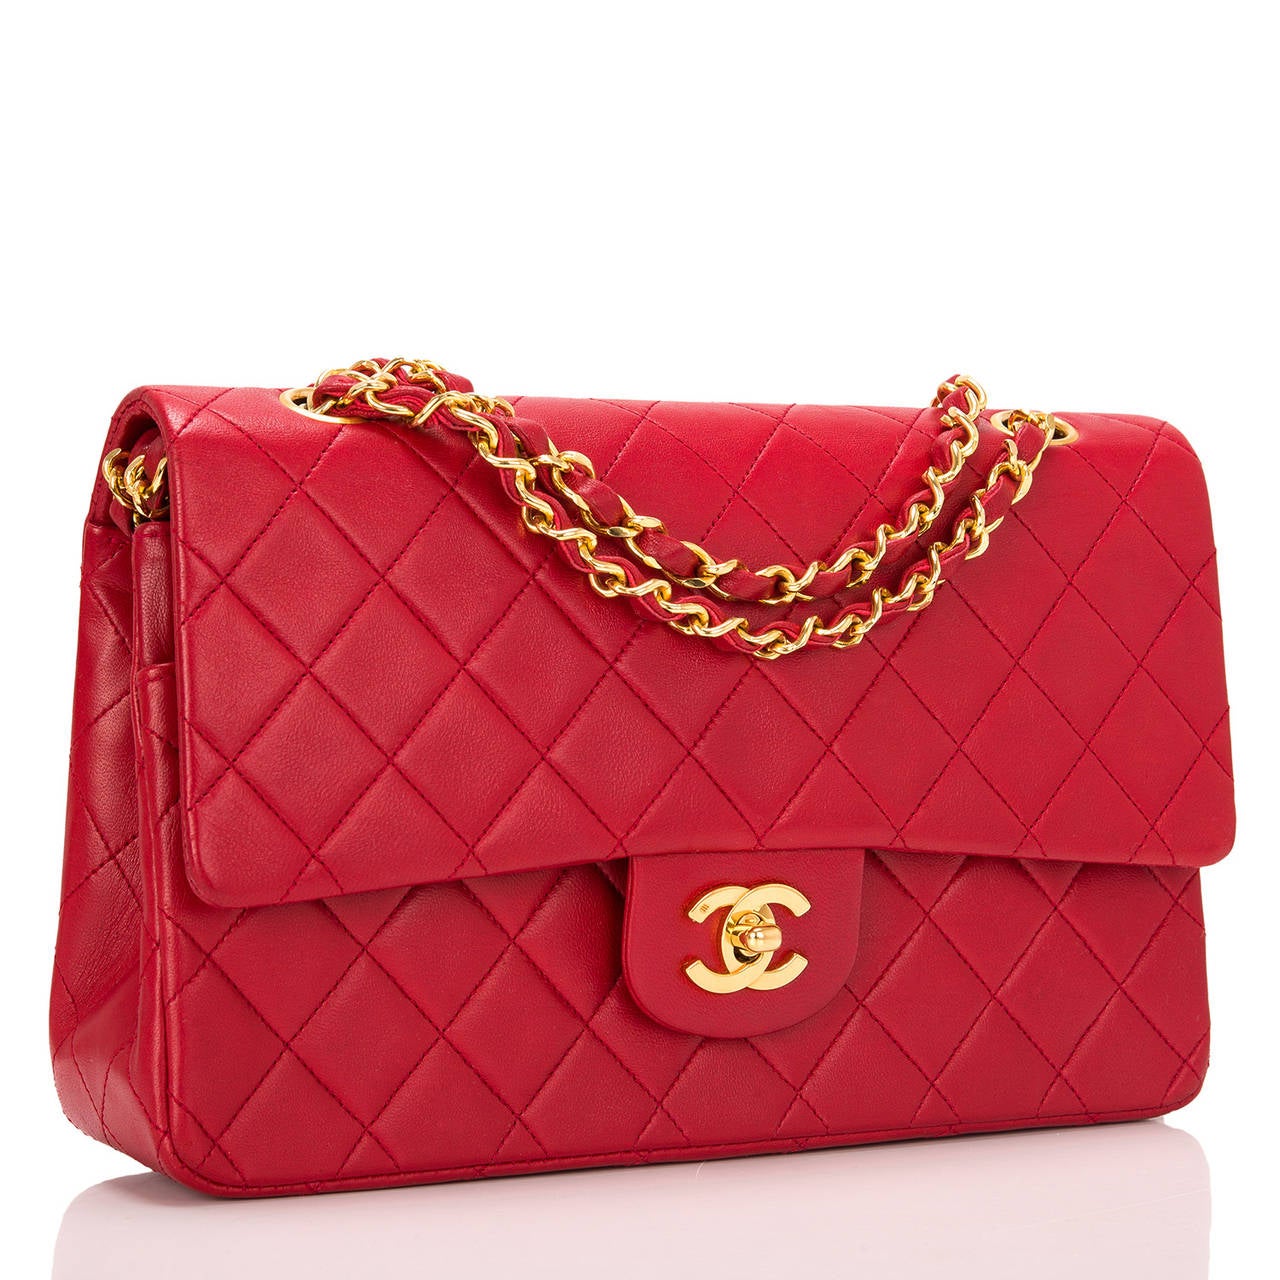 This rare and beautiful vintage Chanel lipstick red Large Classic double flap bag in near mint condition demonstrates the timelessness of the Chanel Classic. This is made of quilted lambskin leather with gold tone hardware. As with all Chanel